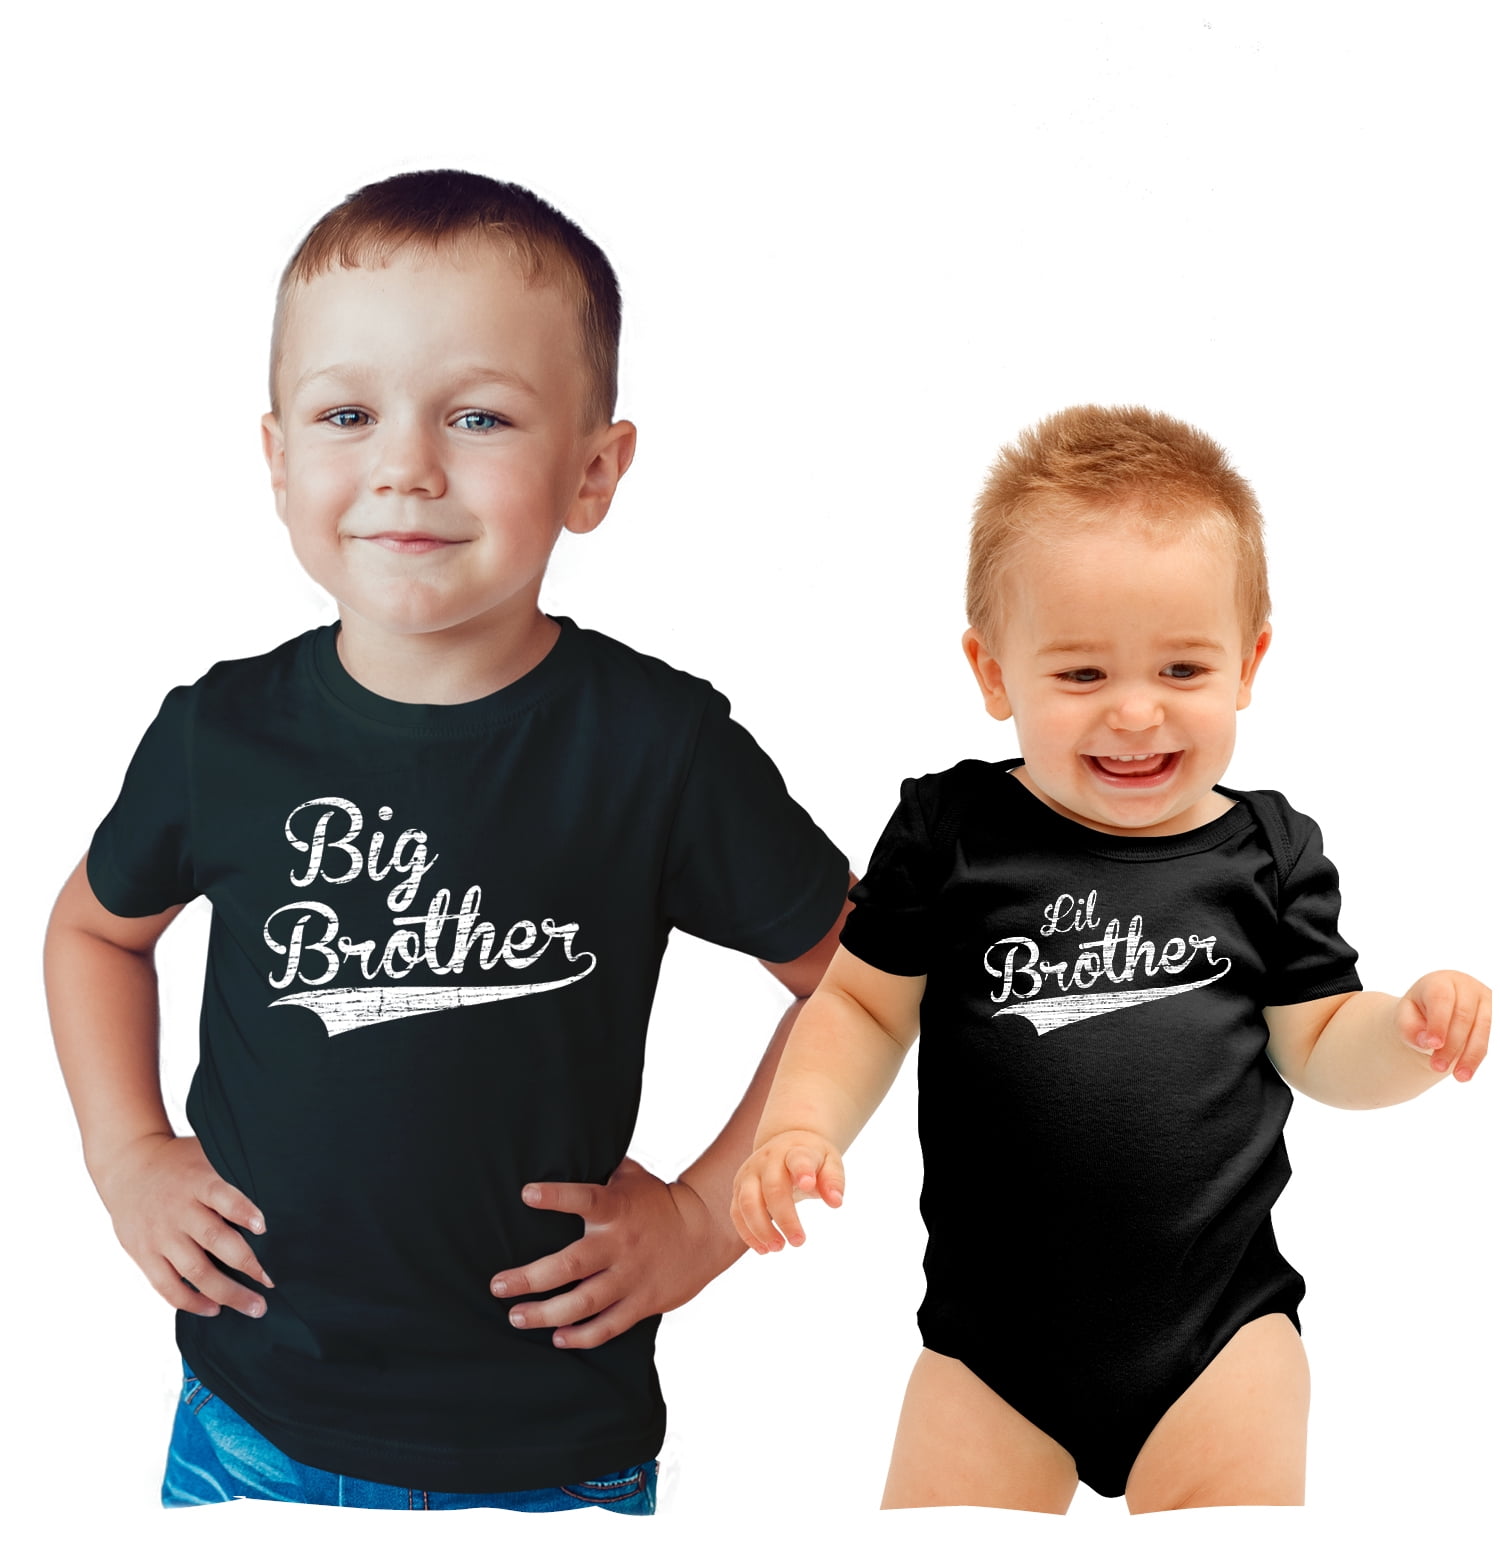 Best Bro Ever T Shirt Tee Top Childrens Kids Brother Sibling Brotherly Love 